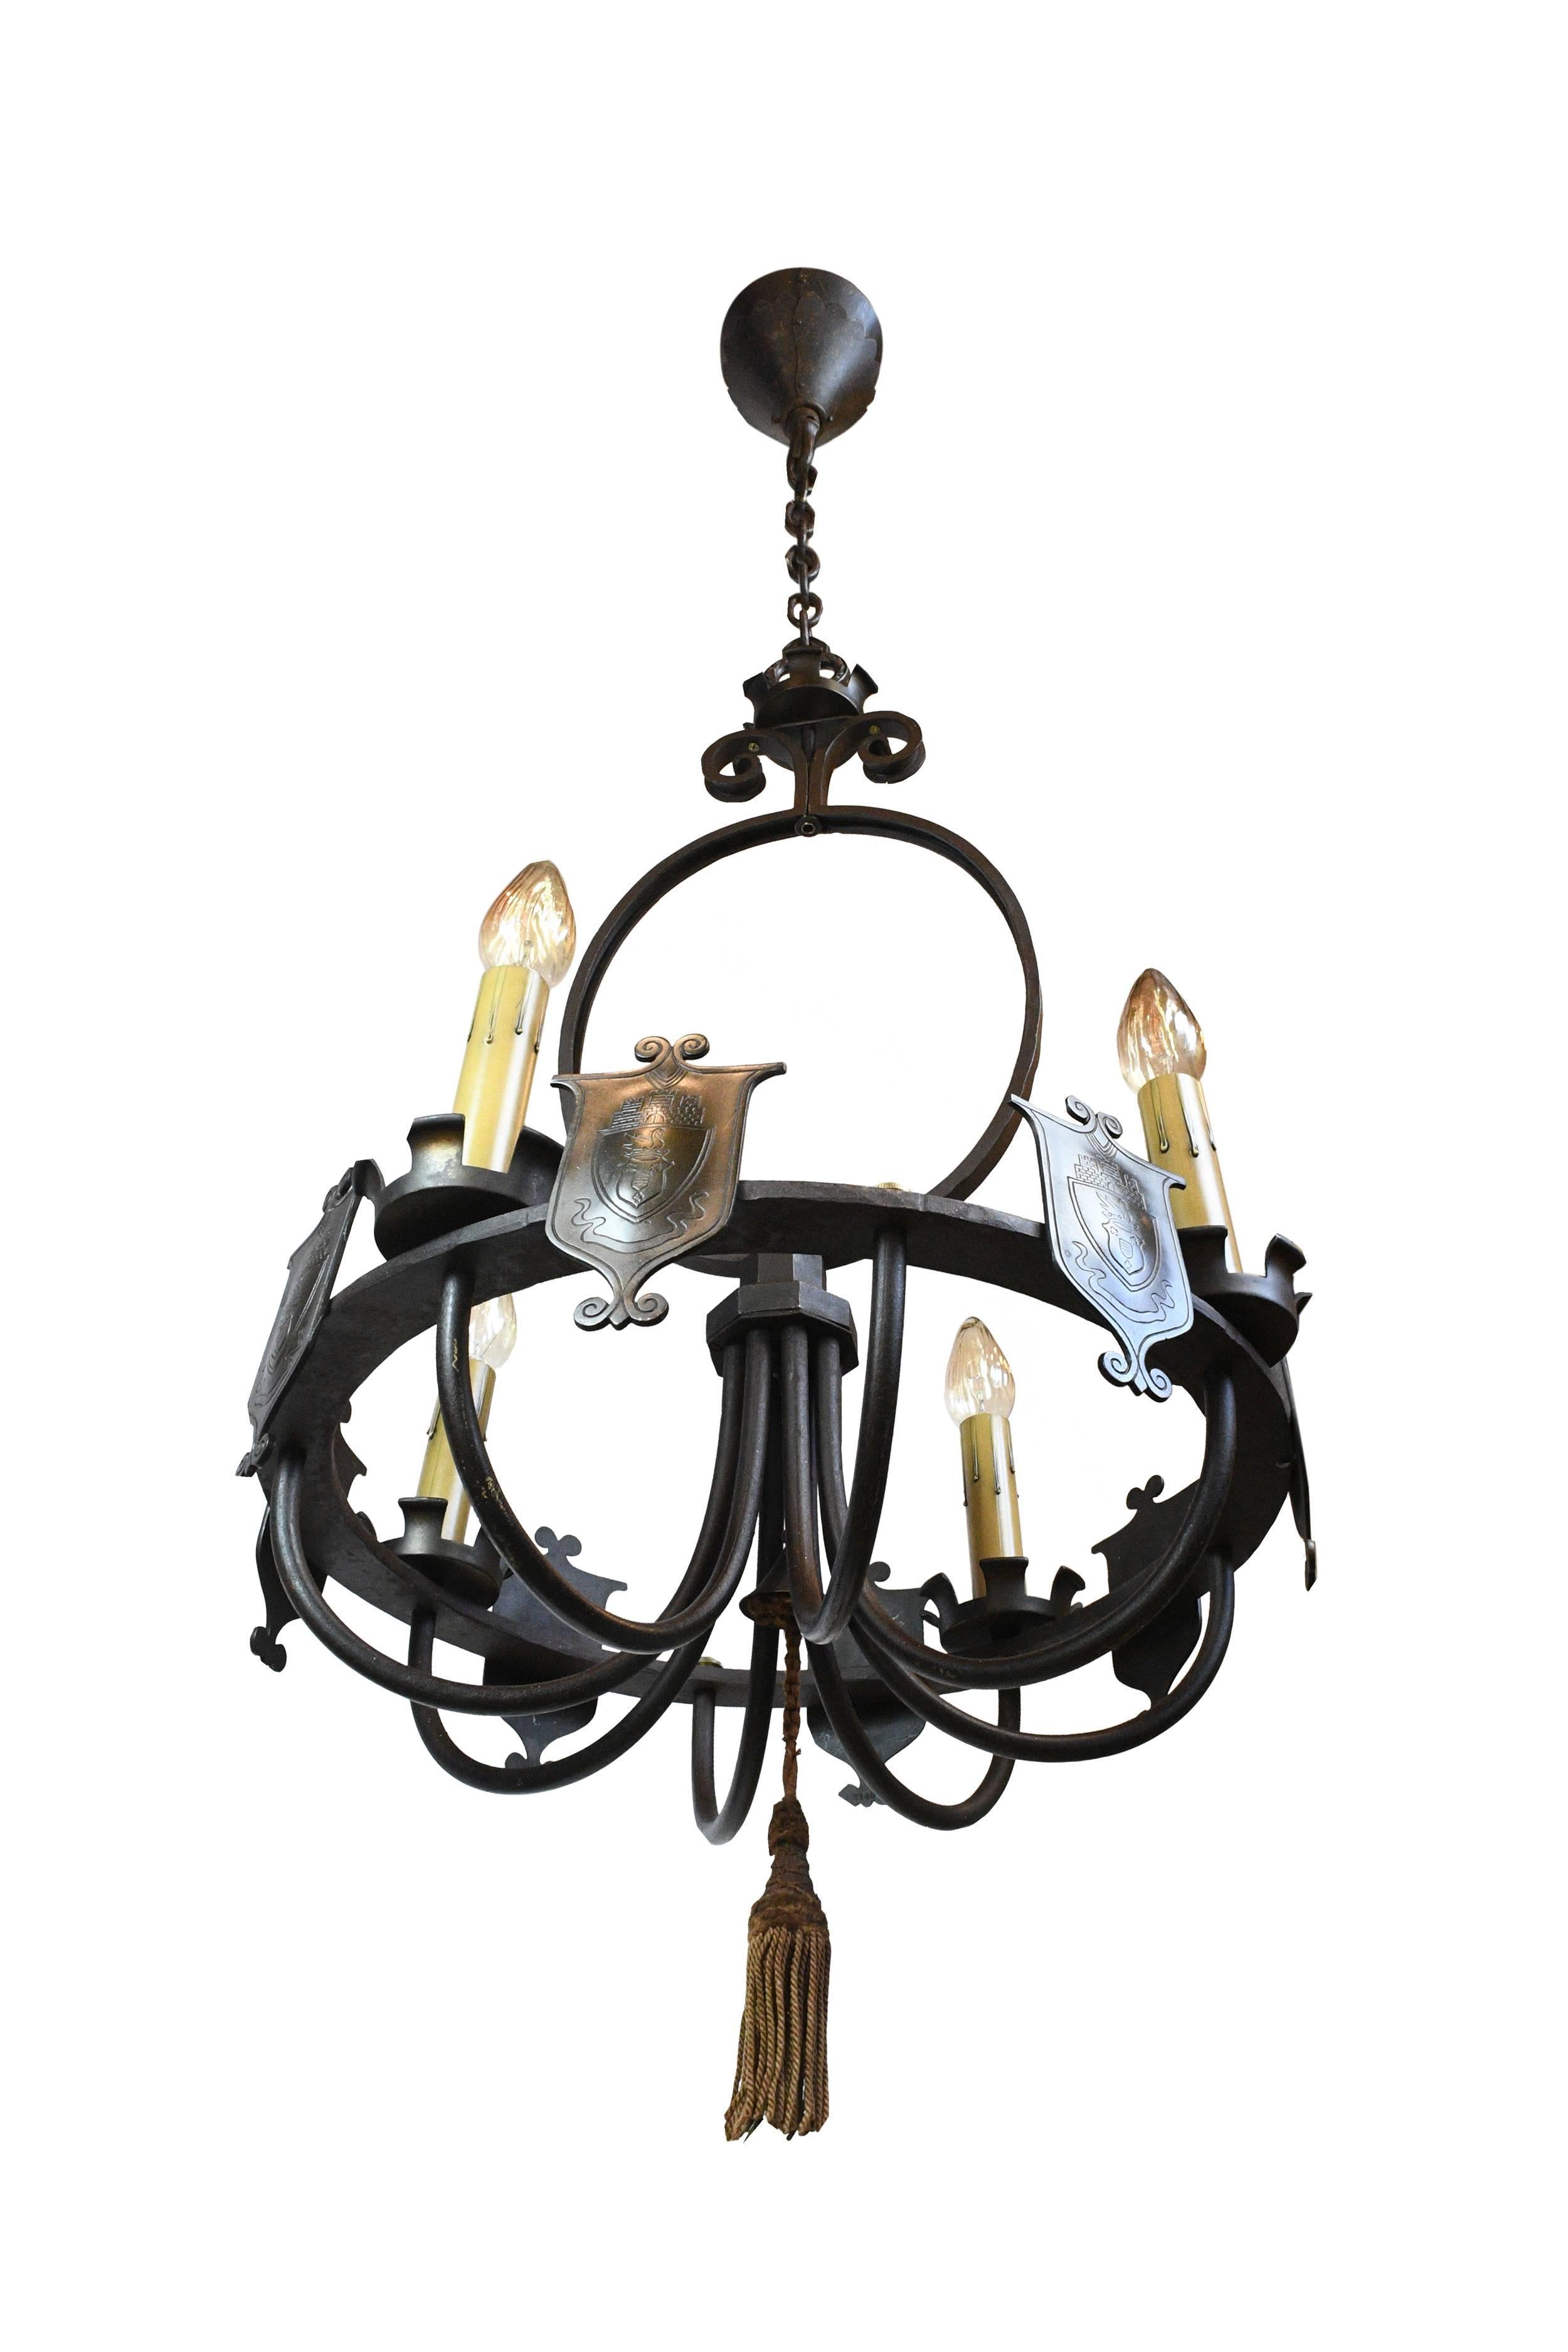 Decorative shields add a royal touch to this large iron chandelier, and sweeping, curving lines give a sense of elegance. This fixture would make a stunning addition over a dining room table, or as a focal point in a large space.

We find that